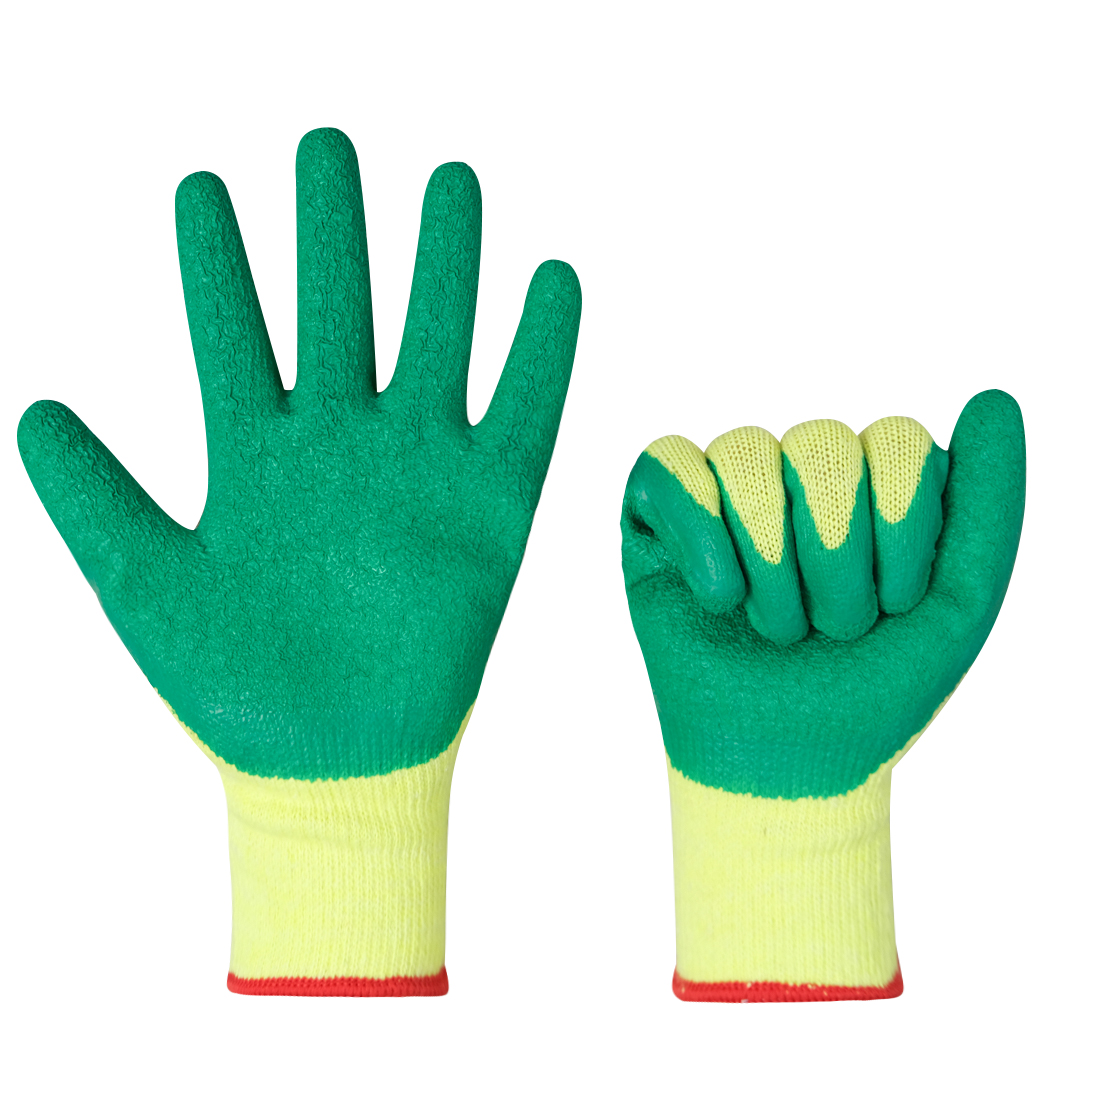 China Wholesale 50-150g/Pair Crinkle Latex Palm Coated Guantes Industrial Safety Work Gloves